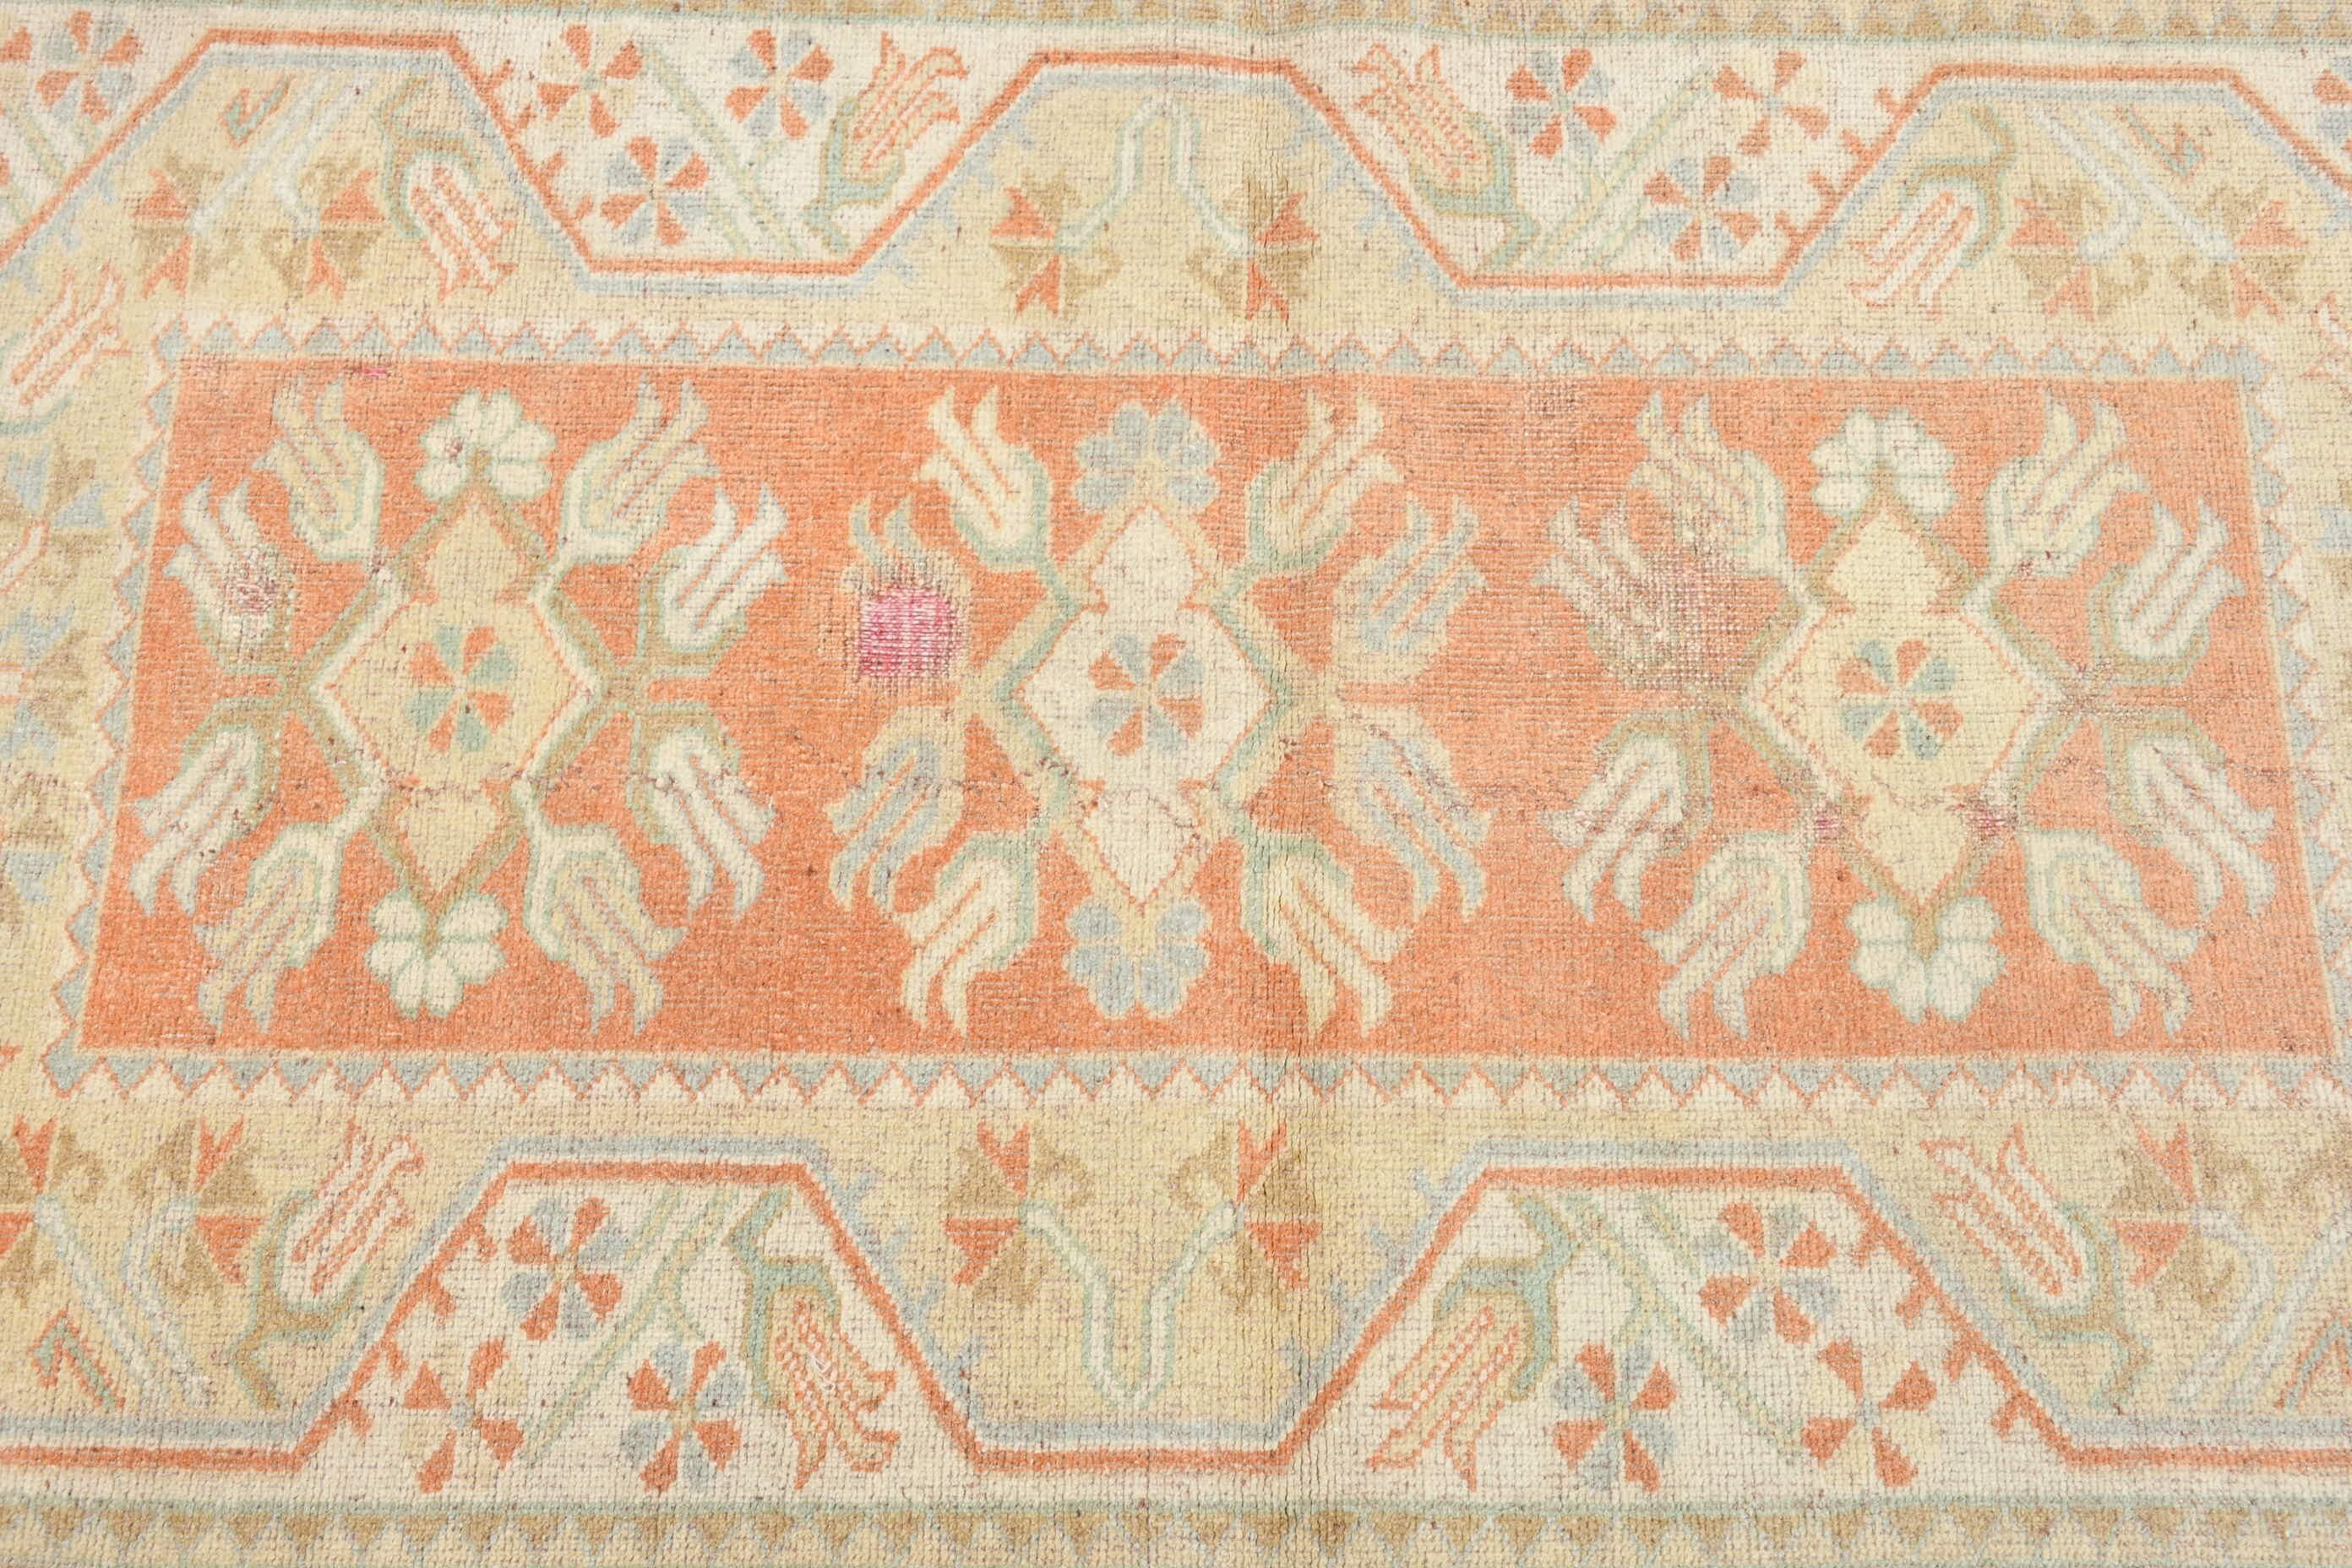 Entry Rugs, Rugs for Entry, 2.7x4.7 ft Small Rugs, Turkish Rug, Kitchen Rug, Orange Moroccan Rugs, Home Decor Rug, Bath Rug, Vintage Rugs